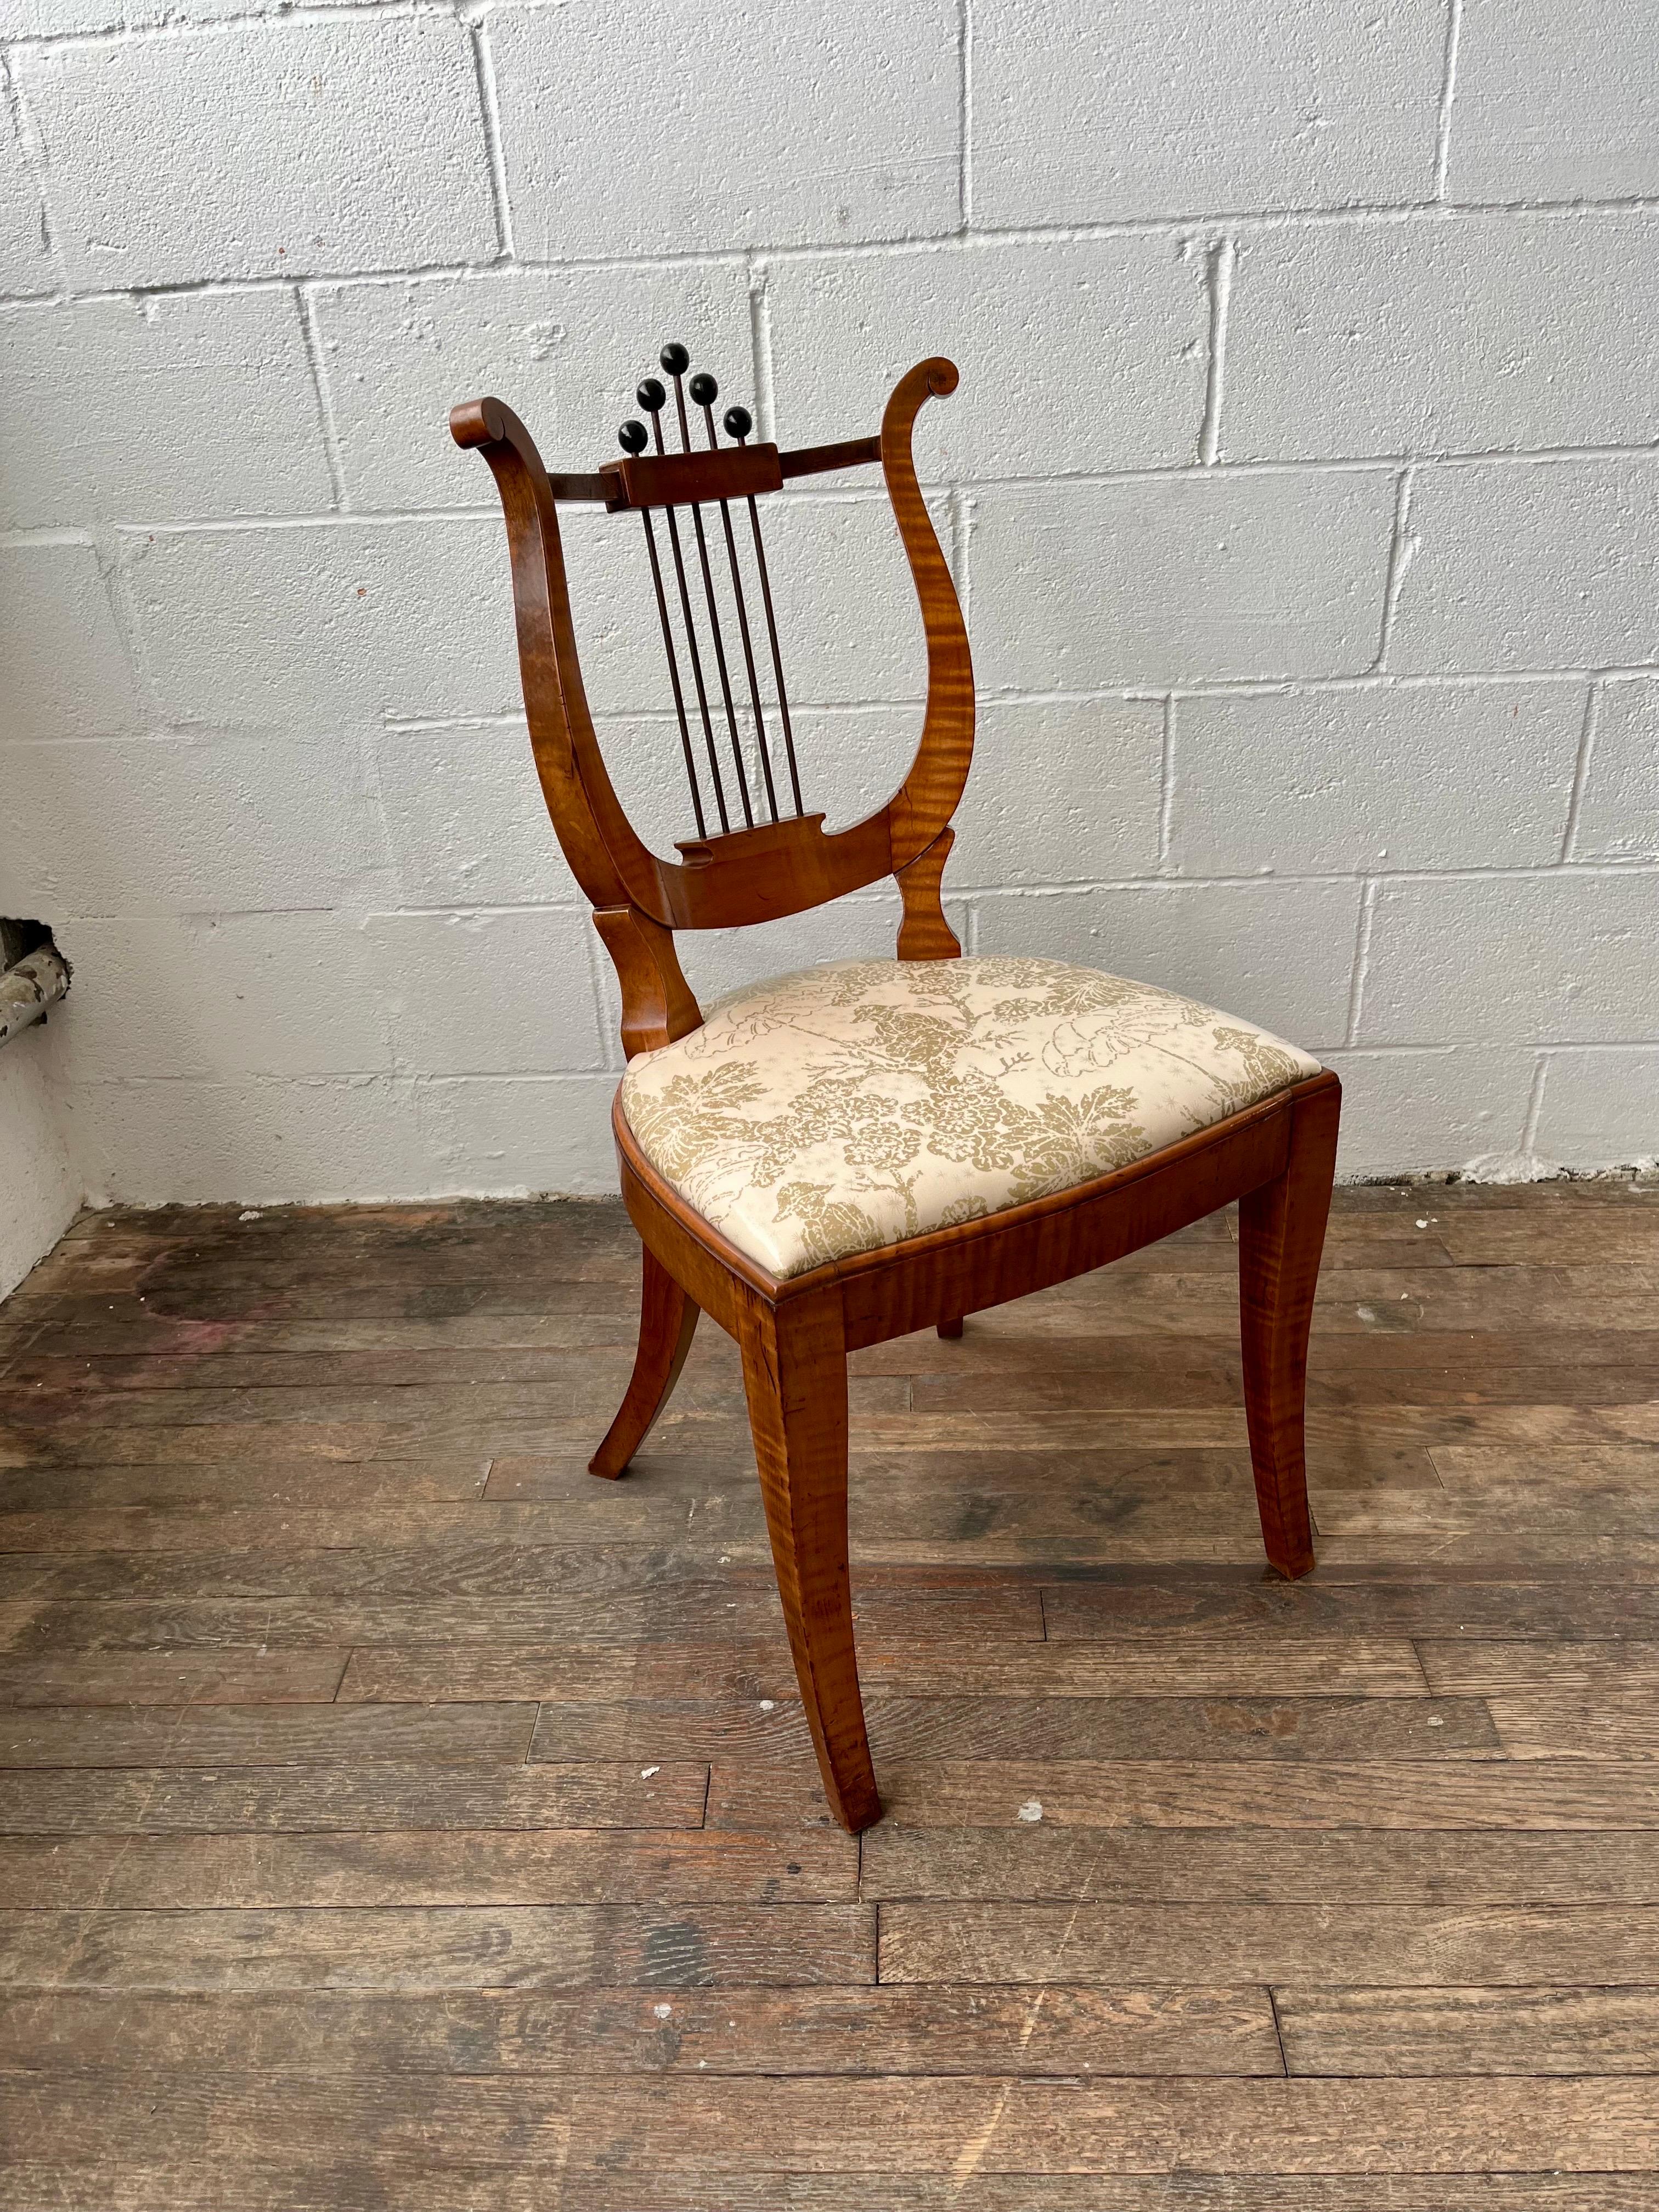 Wonderful Lyre Back chair. Beautiful grained wood and lines. Metal spindles with ball finials. New laminate over silk blend upholstery with a Chinoiserie Chic vibe. 
Curbside to NYC/Philly $300